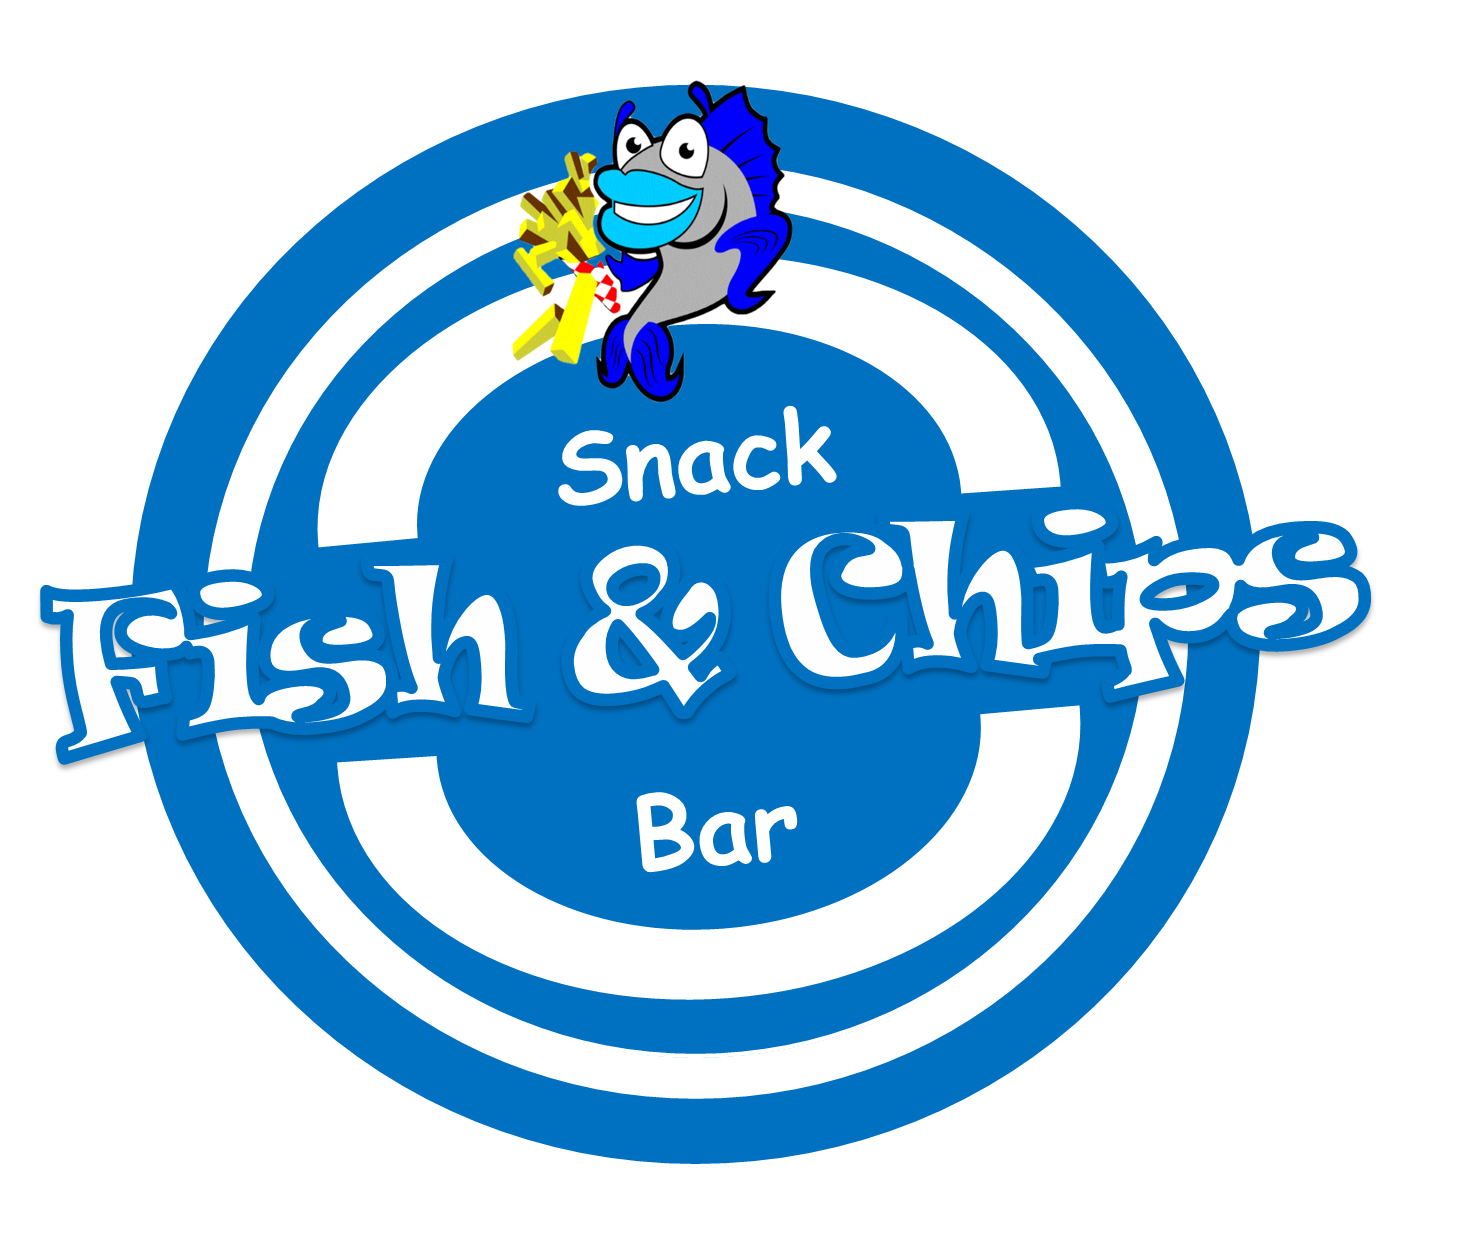 Fish and Chips Snack Bar